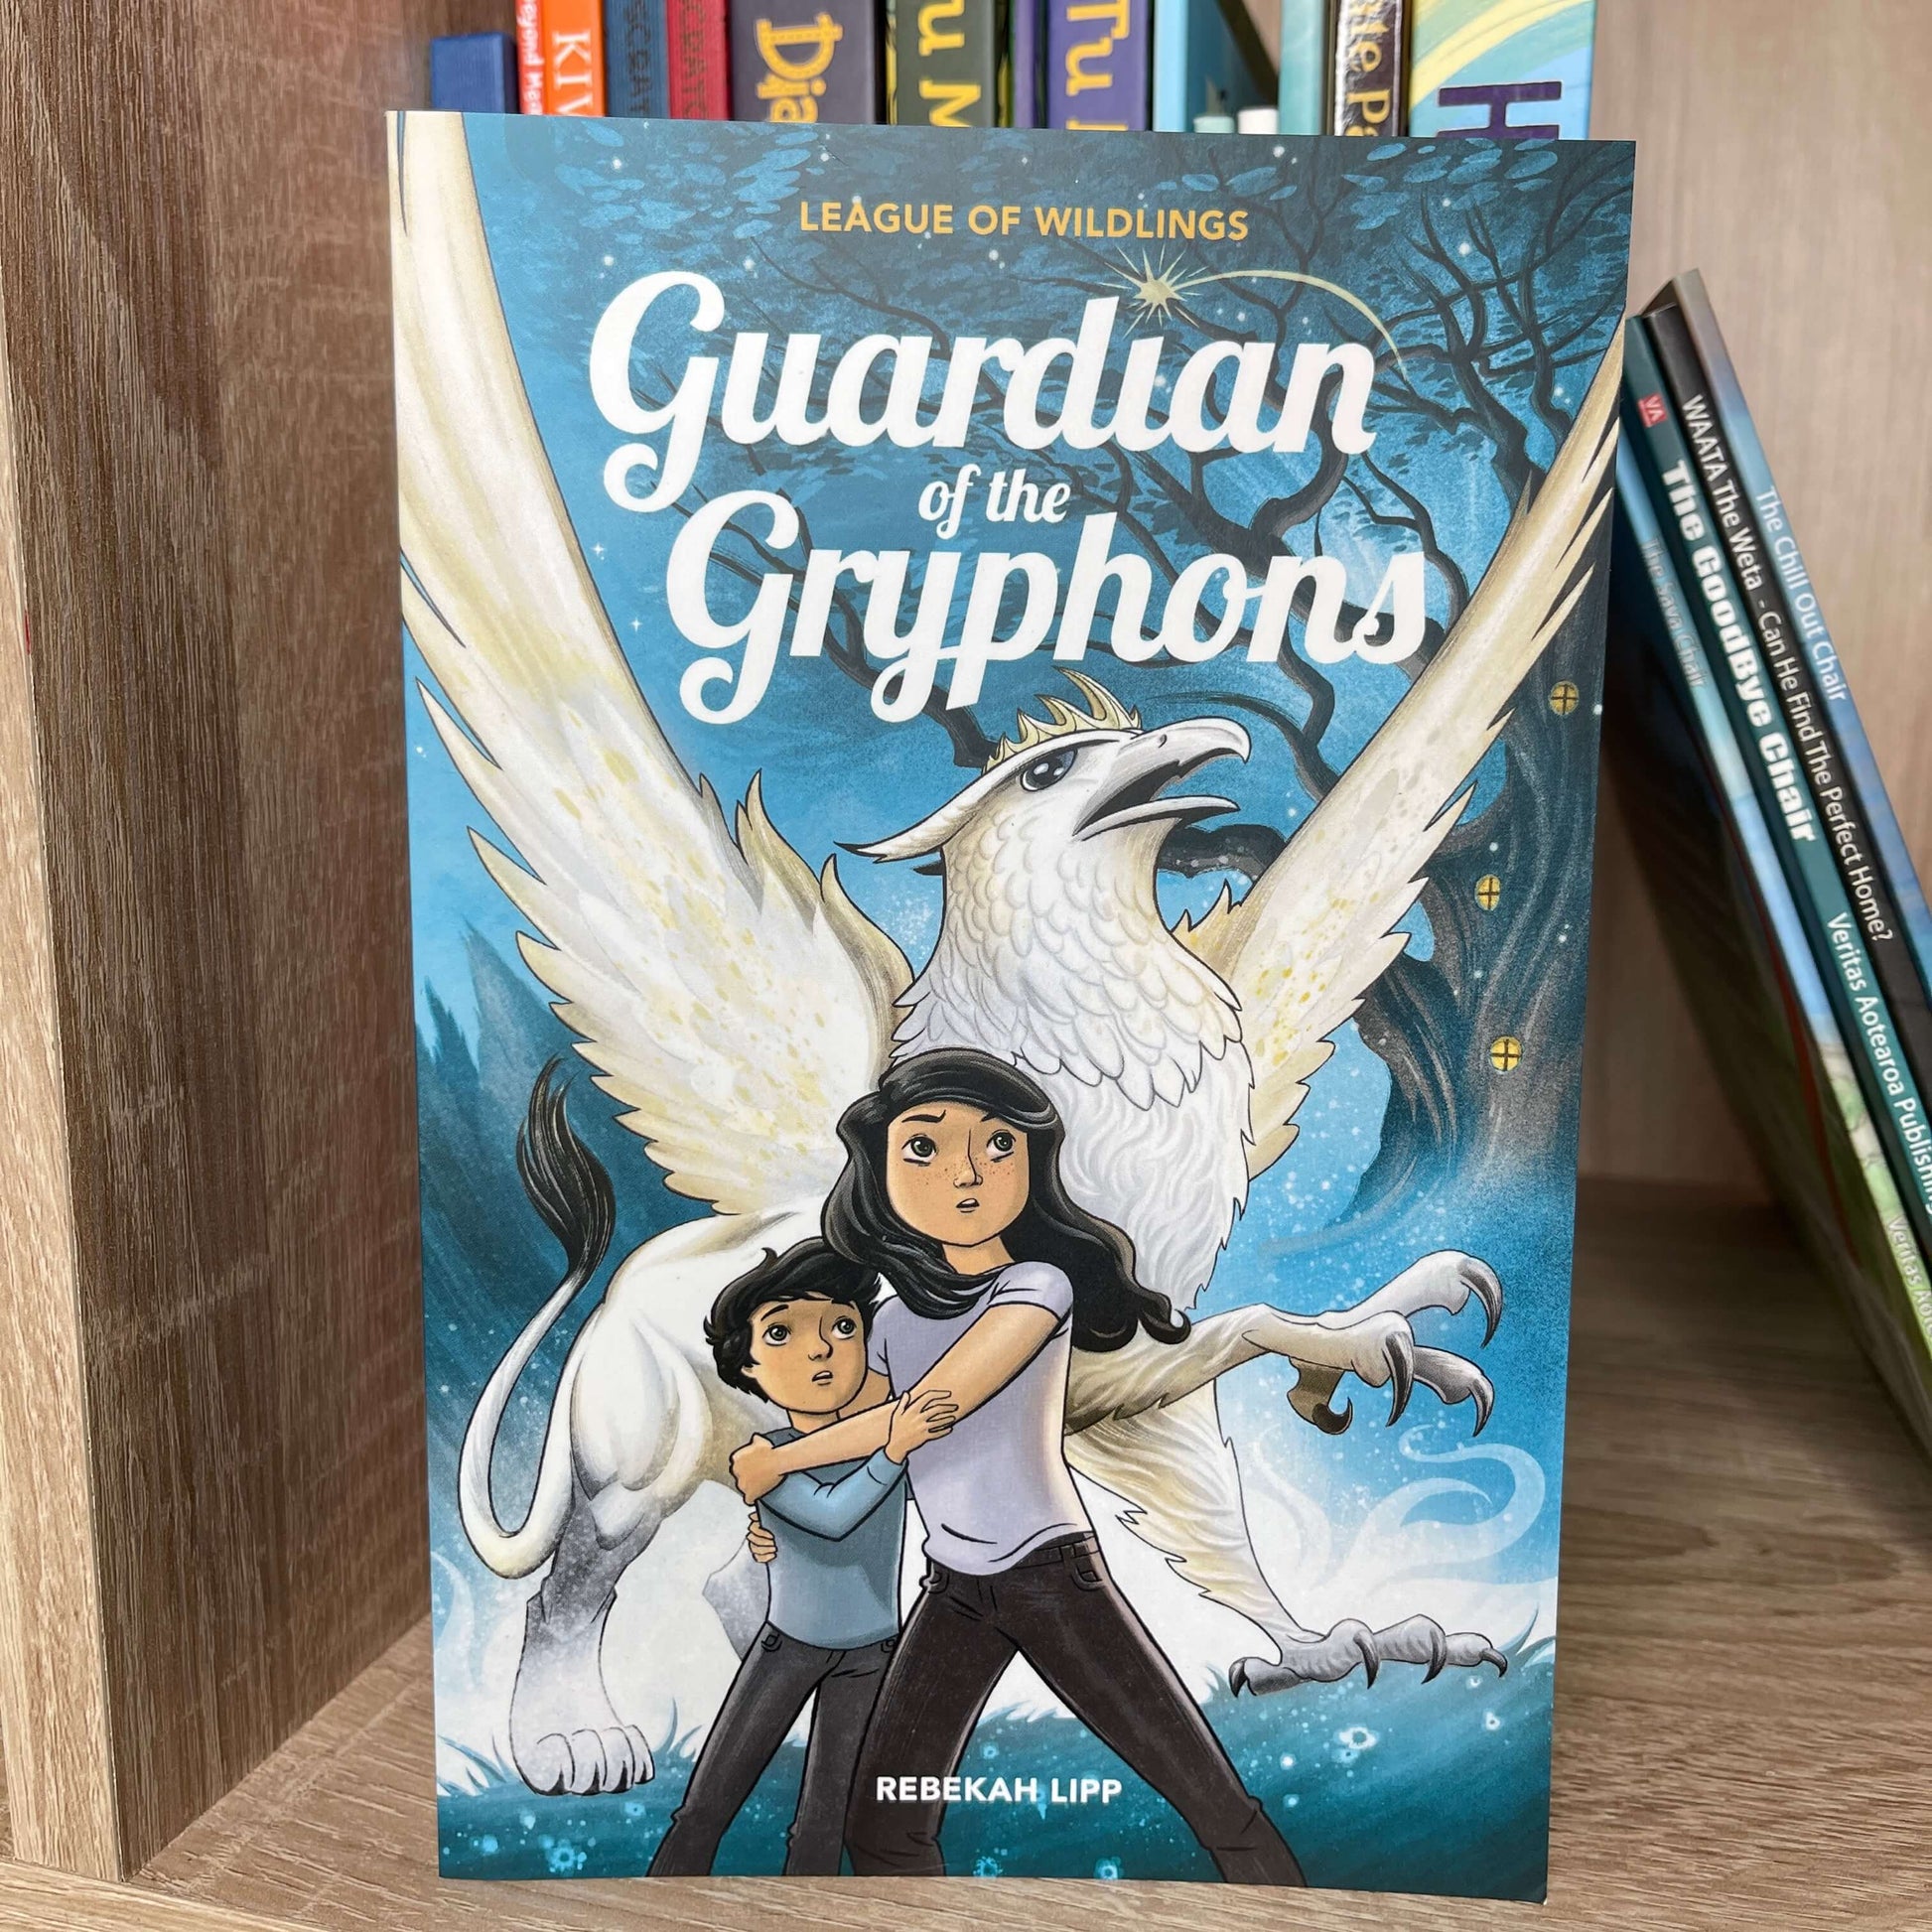 Book Guardian of the Gryphons, a league of wildlings book by Rebekah Lipp.